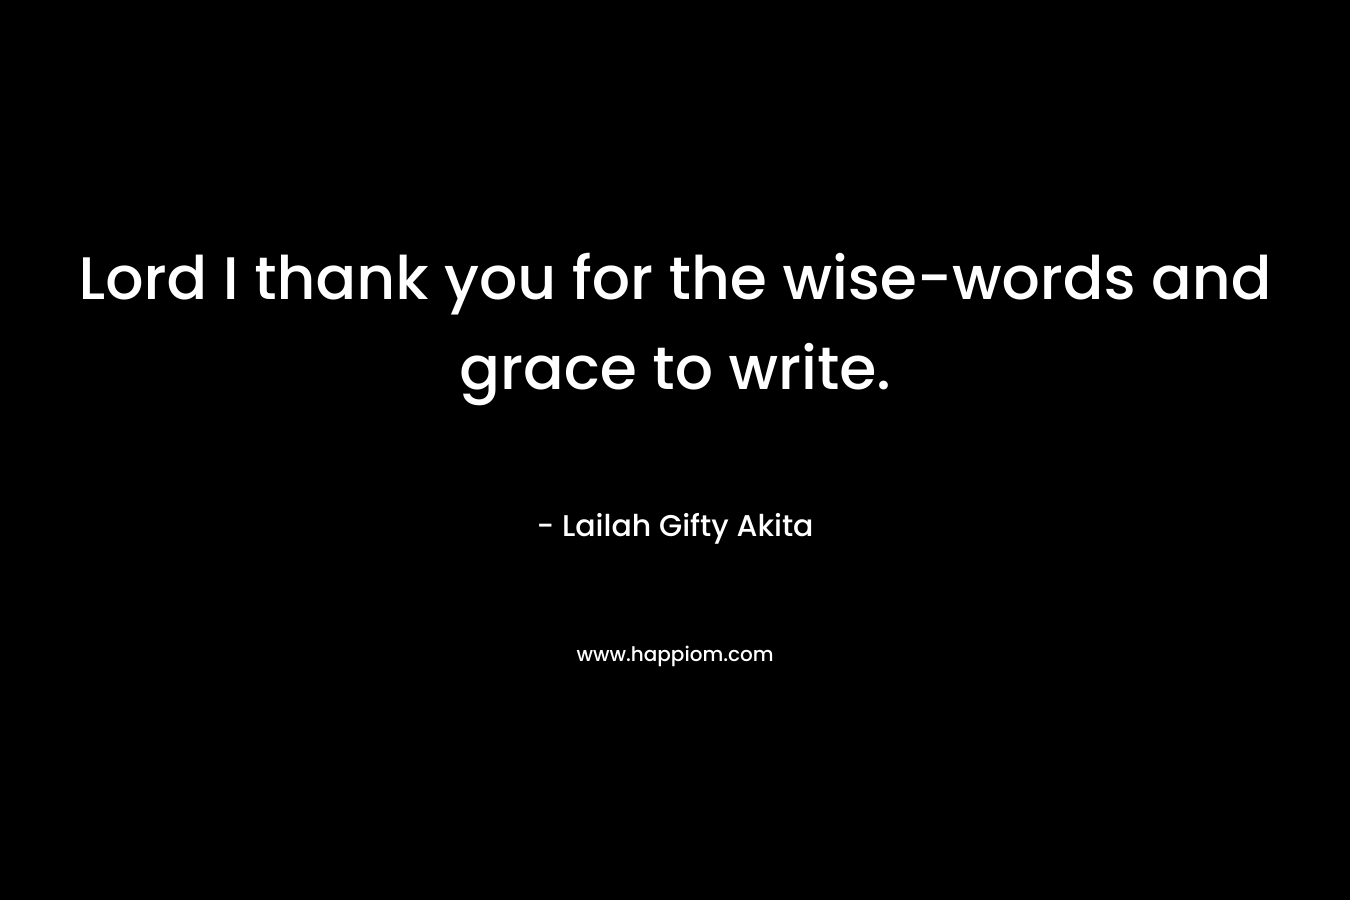 Lord I thank you for the wise-words and grace to write. – Lailah Gifty Akita